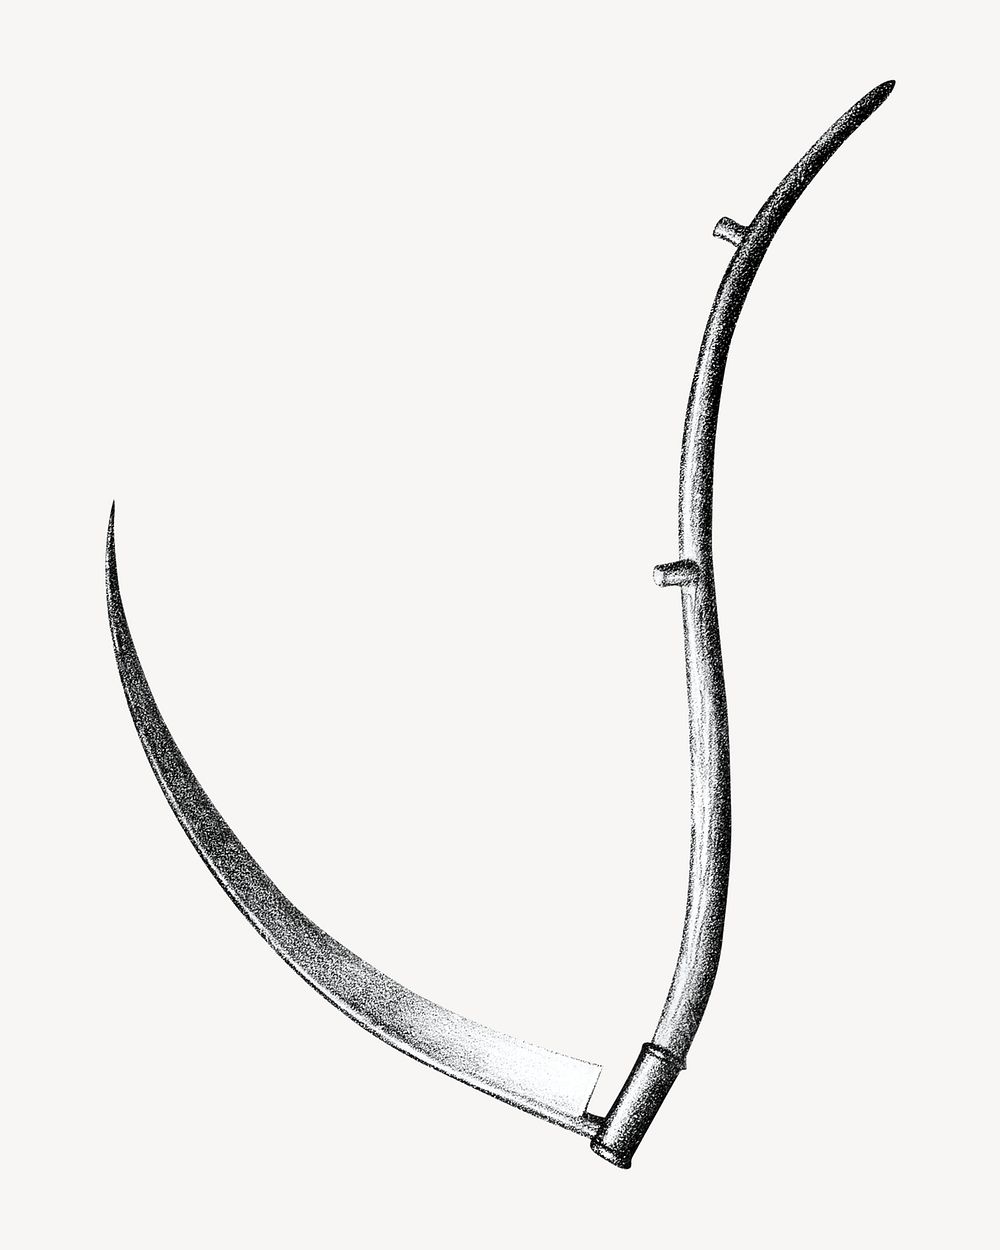 Vintage sickle illustration. Remixed by rawpixel.